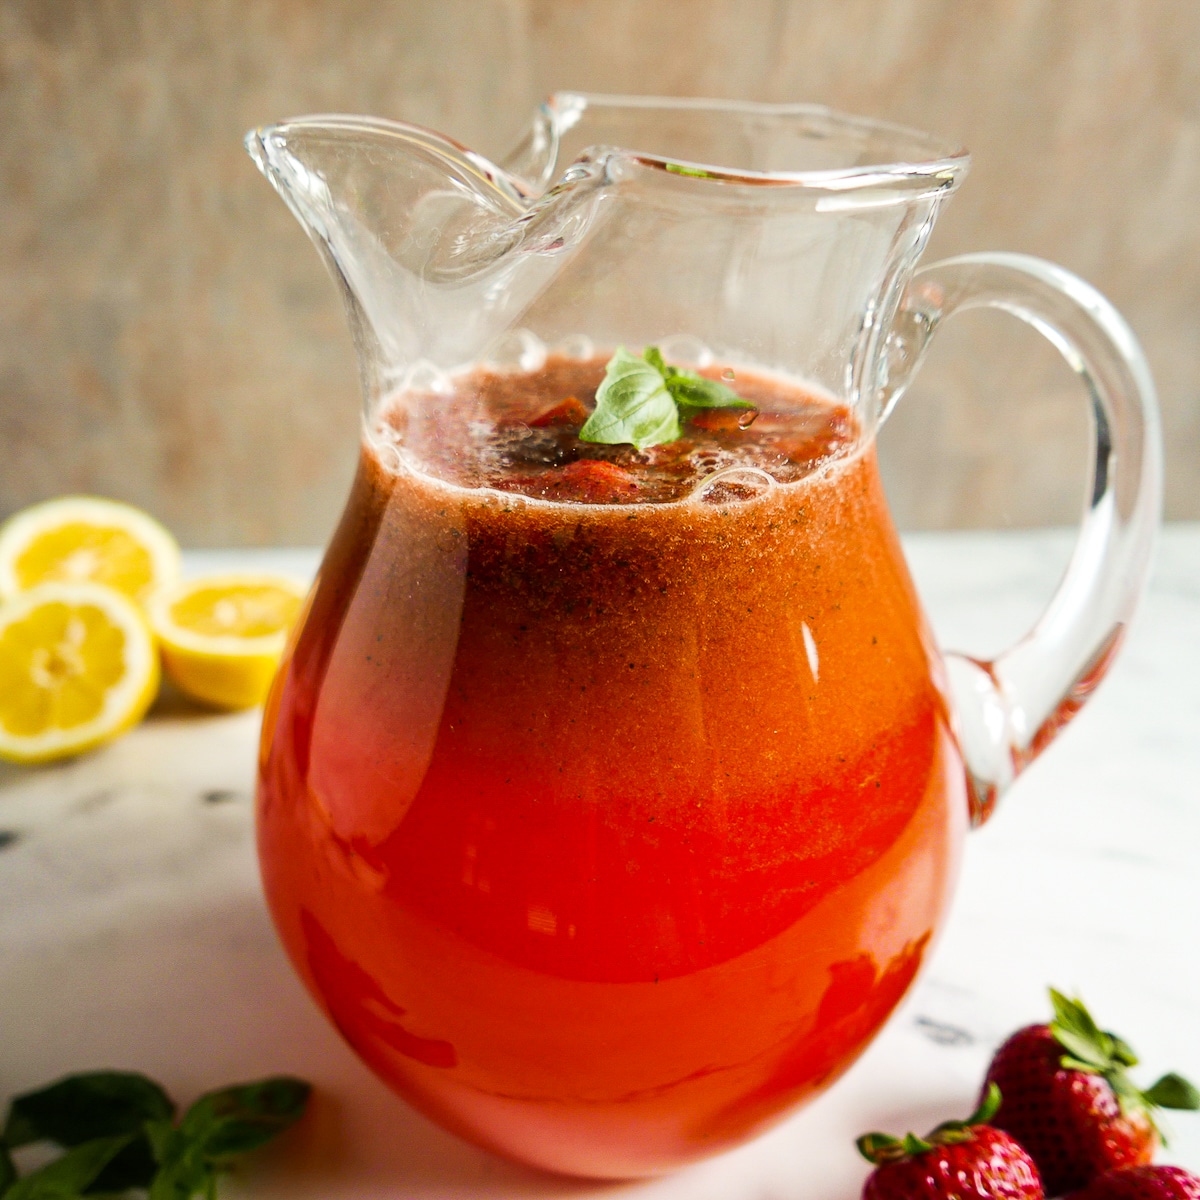 Strawberry lemonade poured into a large pitcher.